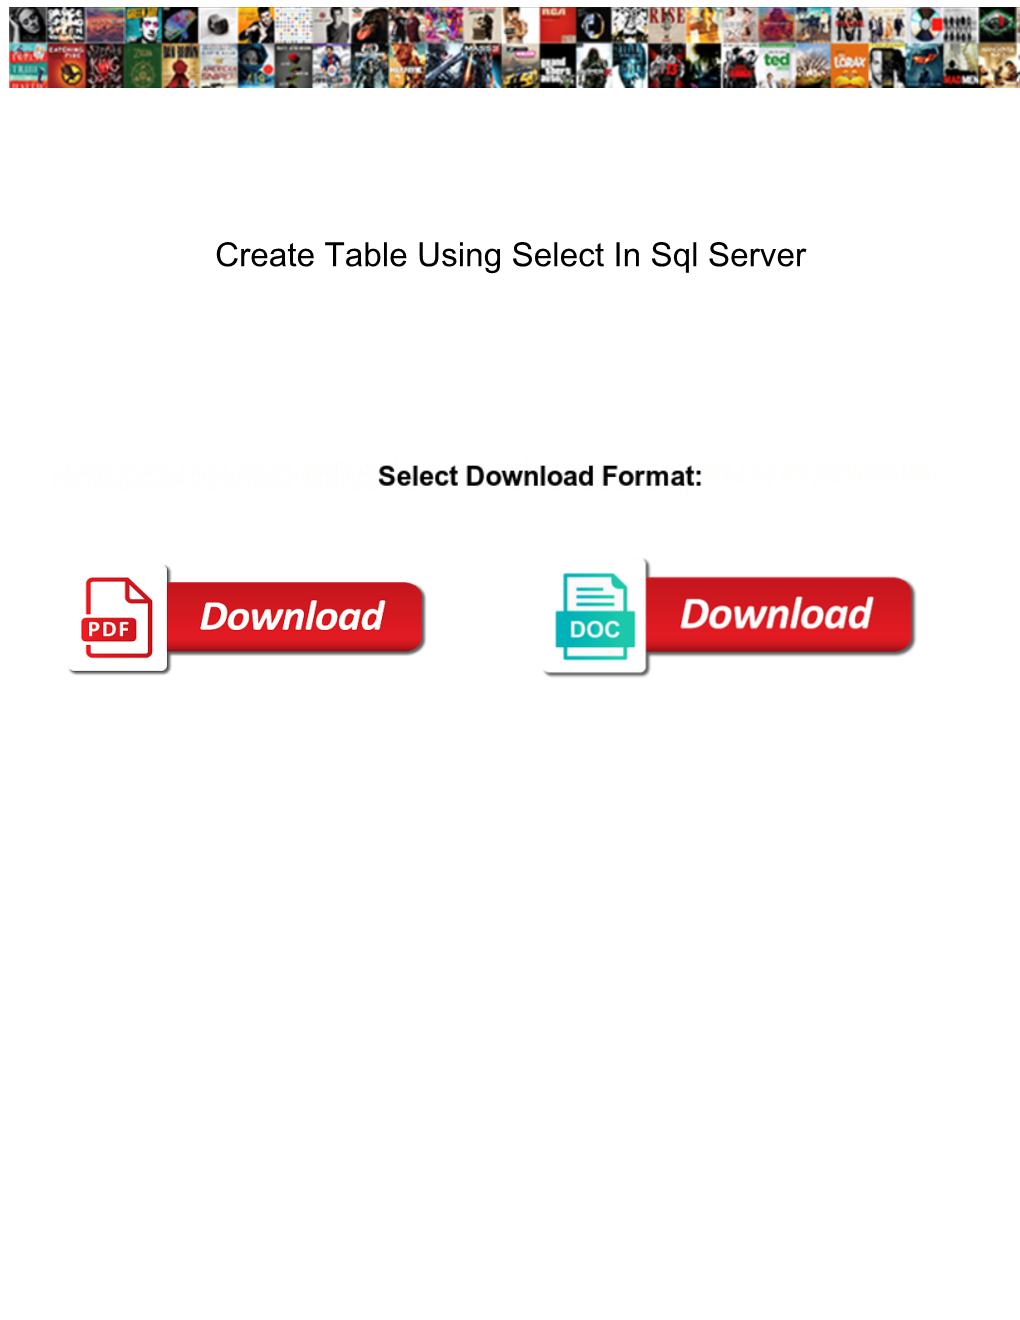 Create Table Using Select in Sql Server